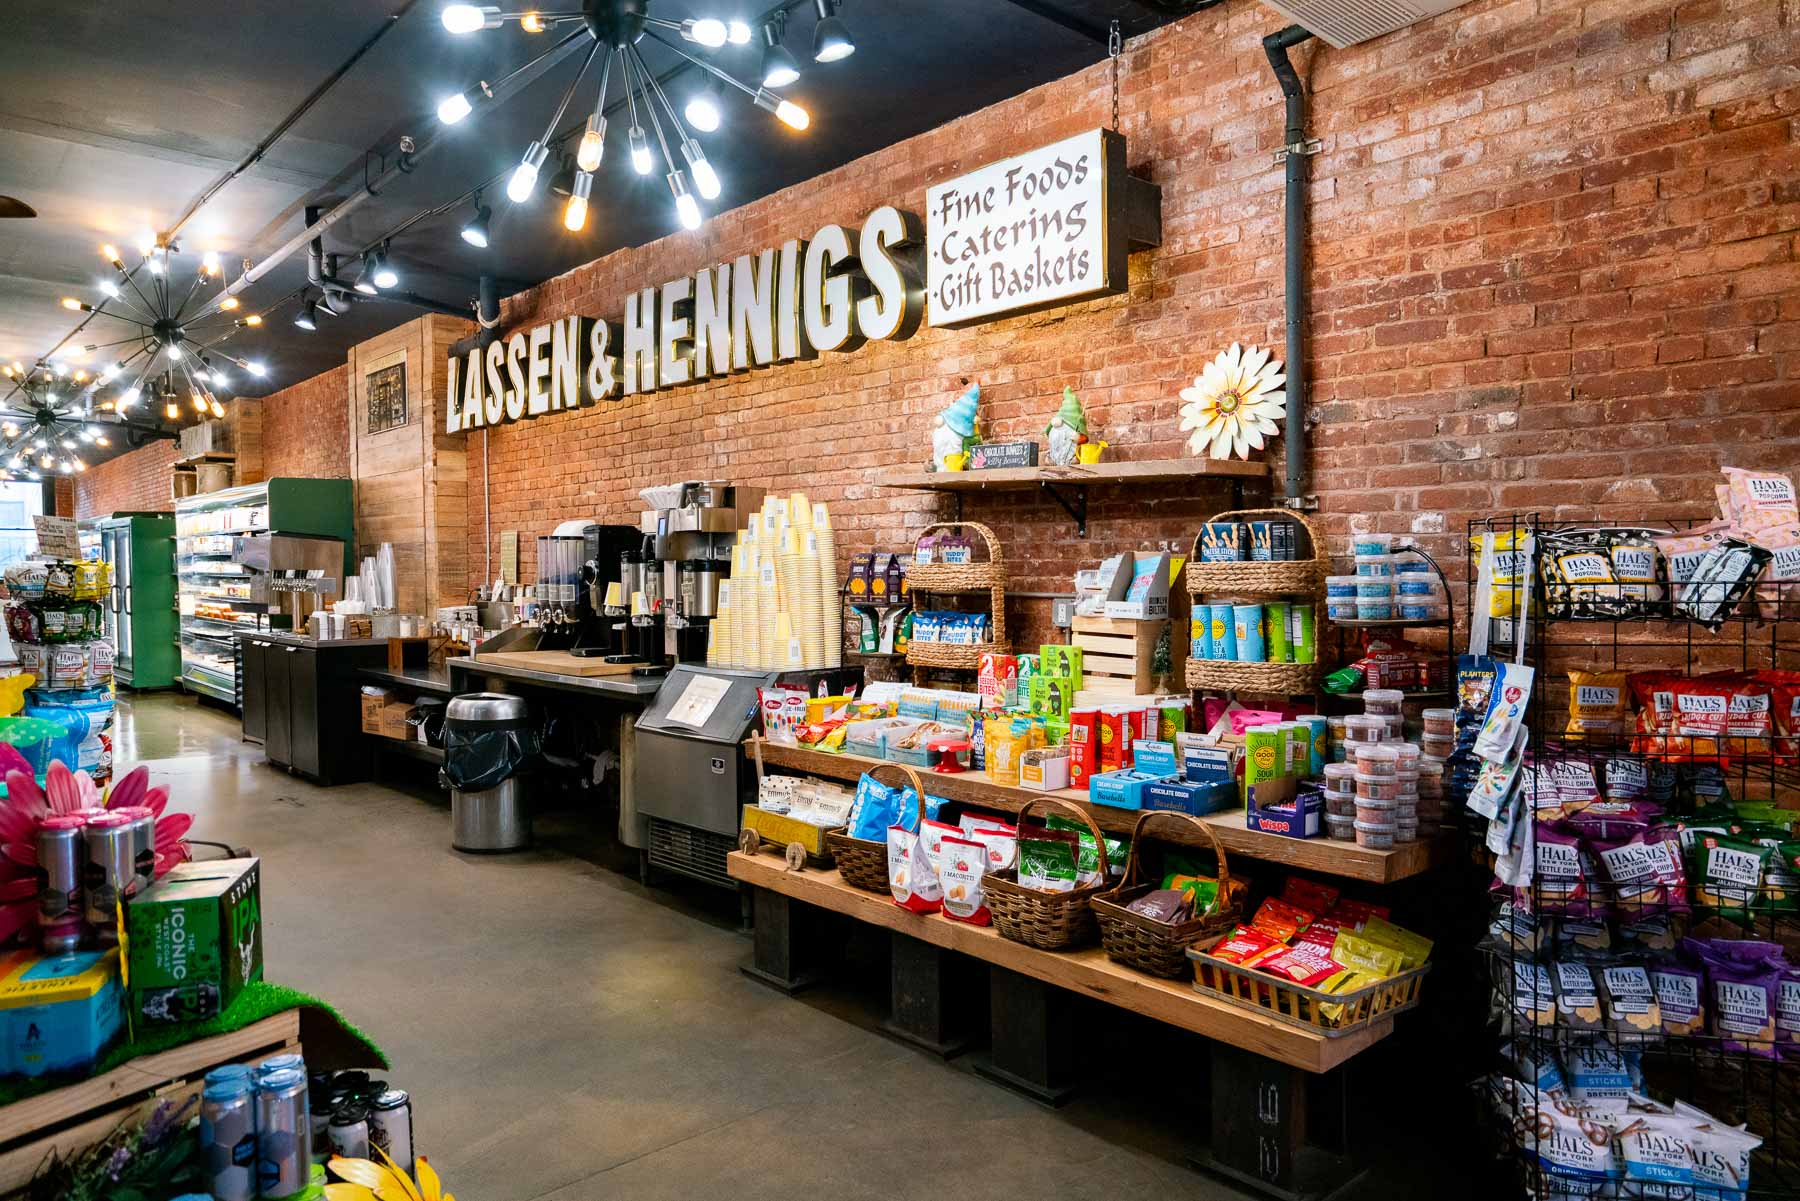 Stocked shelves and coffee counter at Lassen & Hennigs